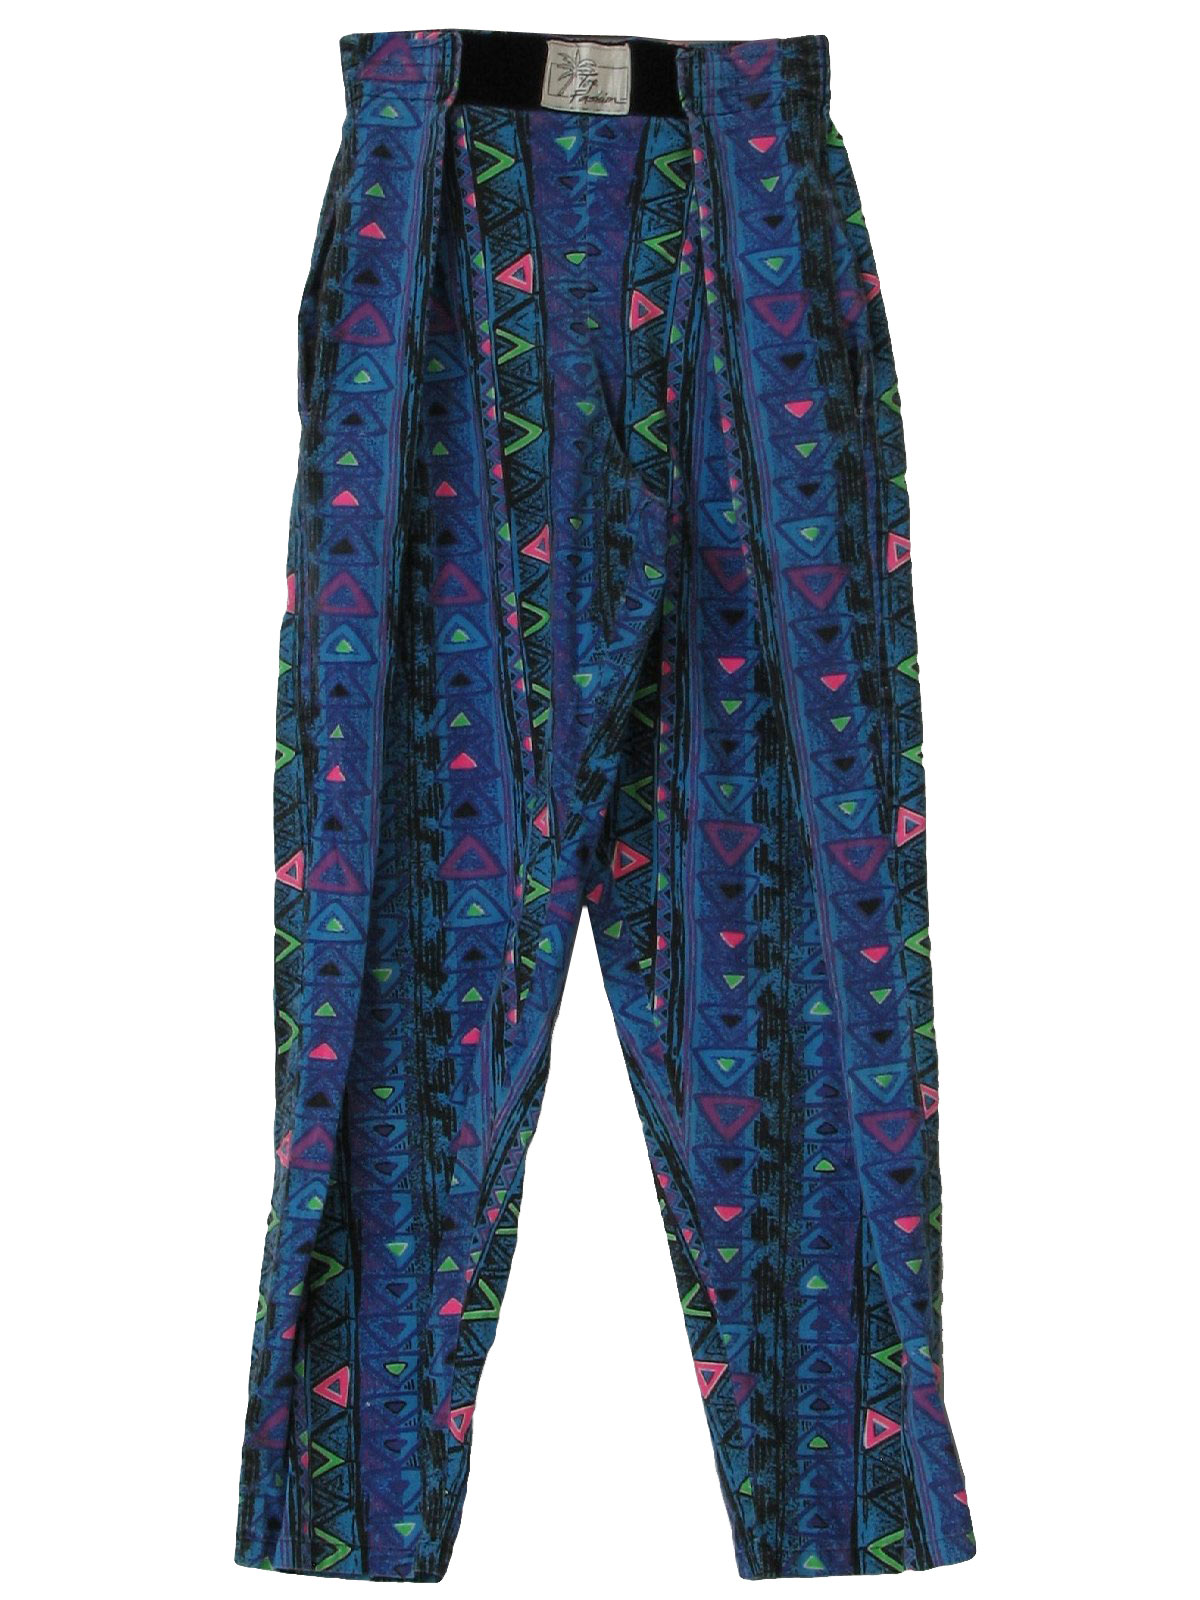 80's Top Fashion Pants: 80s -Top Fashion- Mens teal blue, violet, green ...